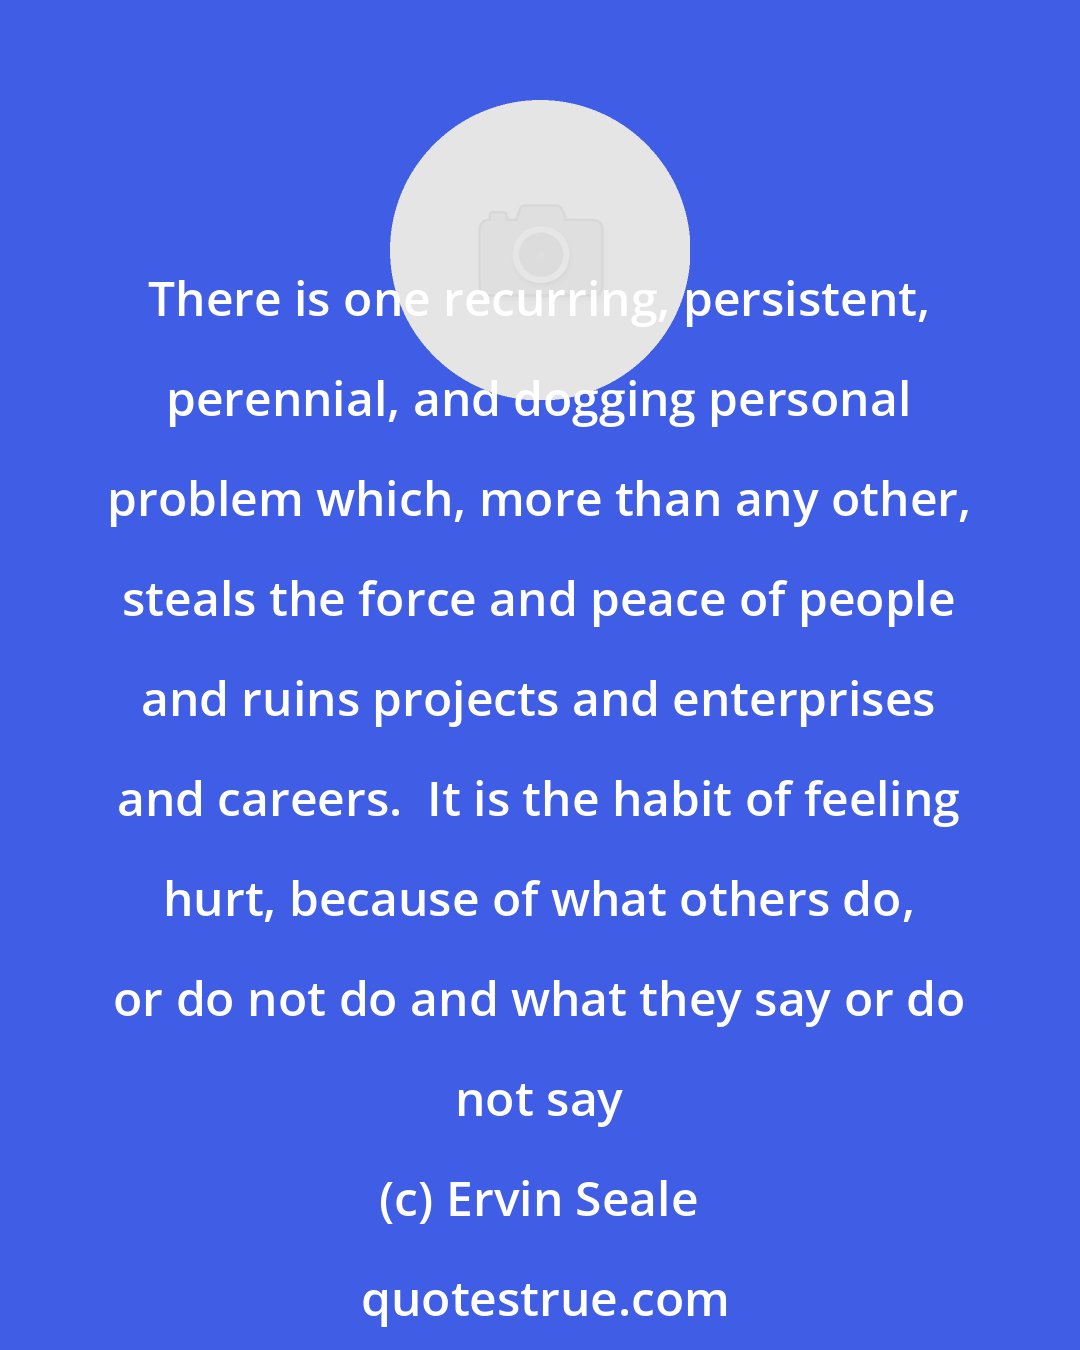 Ervin Seale: There is one recurring, persistent, perennial, and dogging personal problem which, more than any other, steals the force and peace of people and ruins projects and enterprises and careers.  It is the habit of feeling hurt, because of what others do, or do not do and what they say or do not say